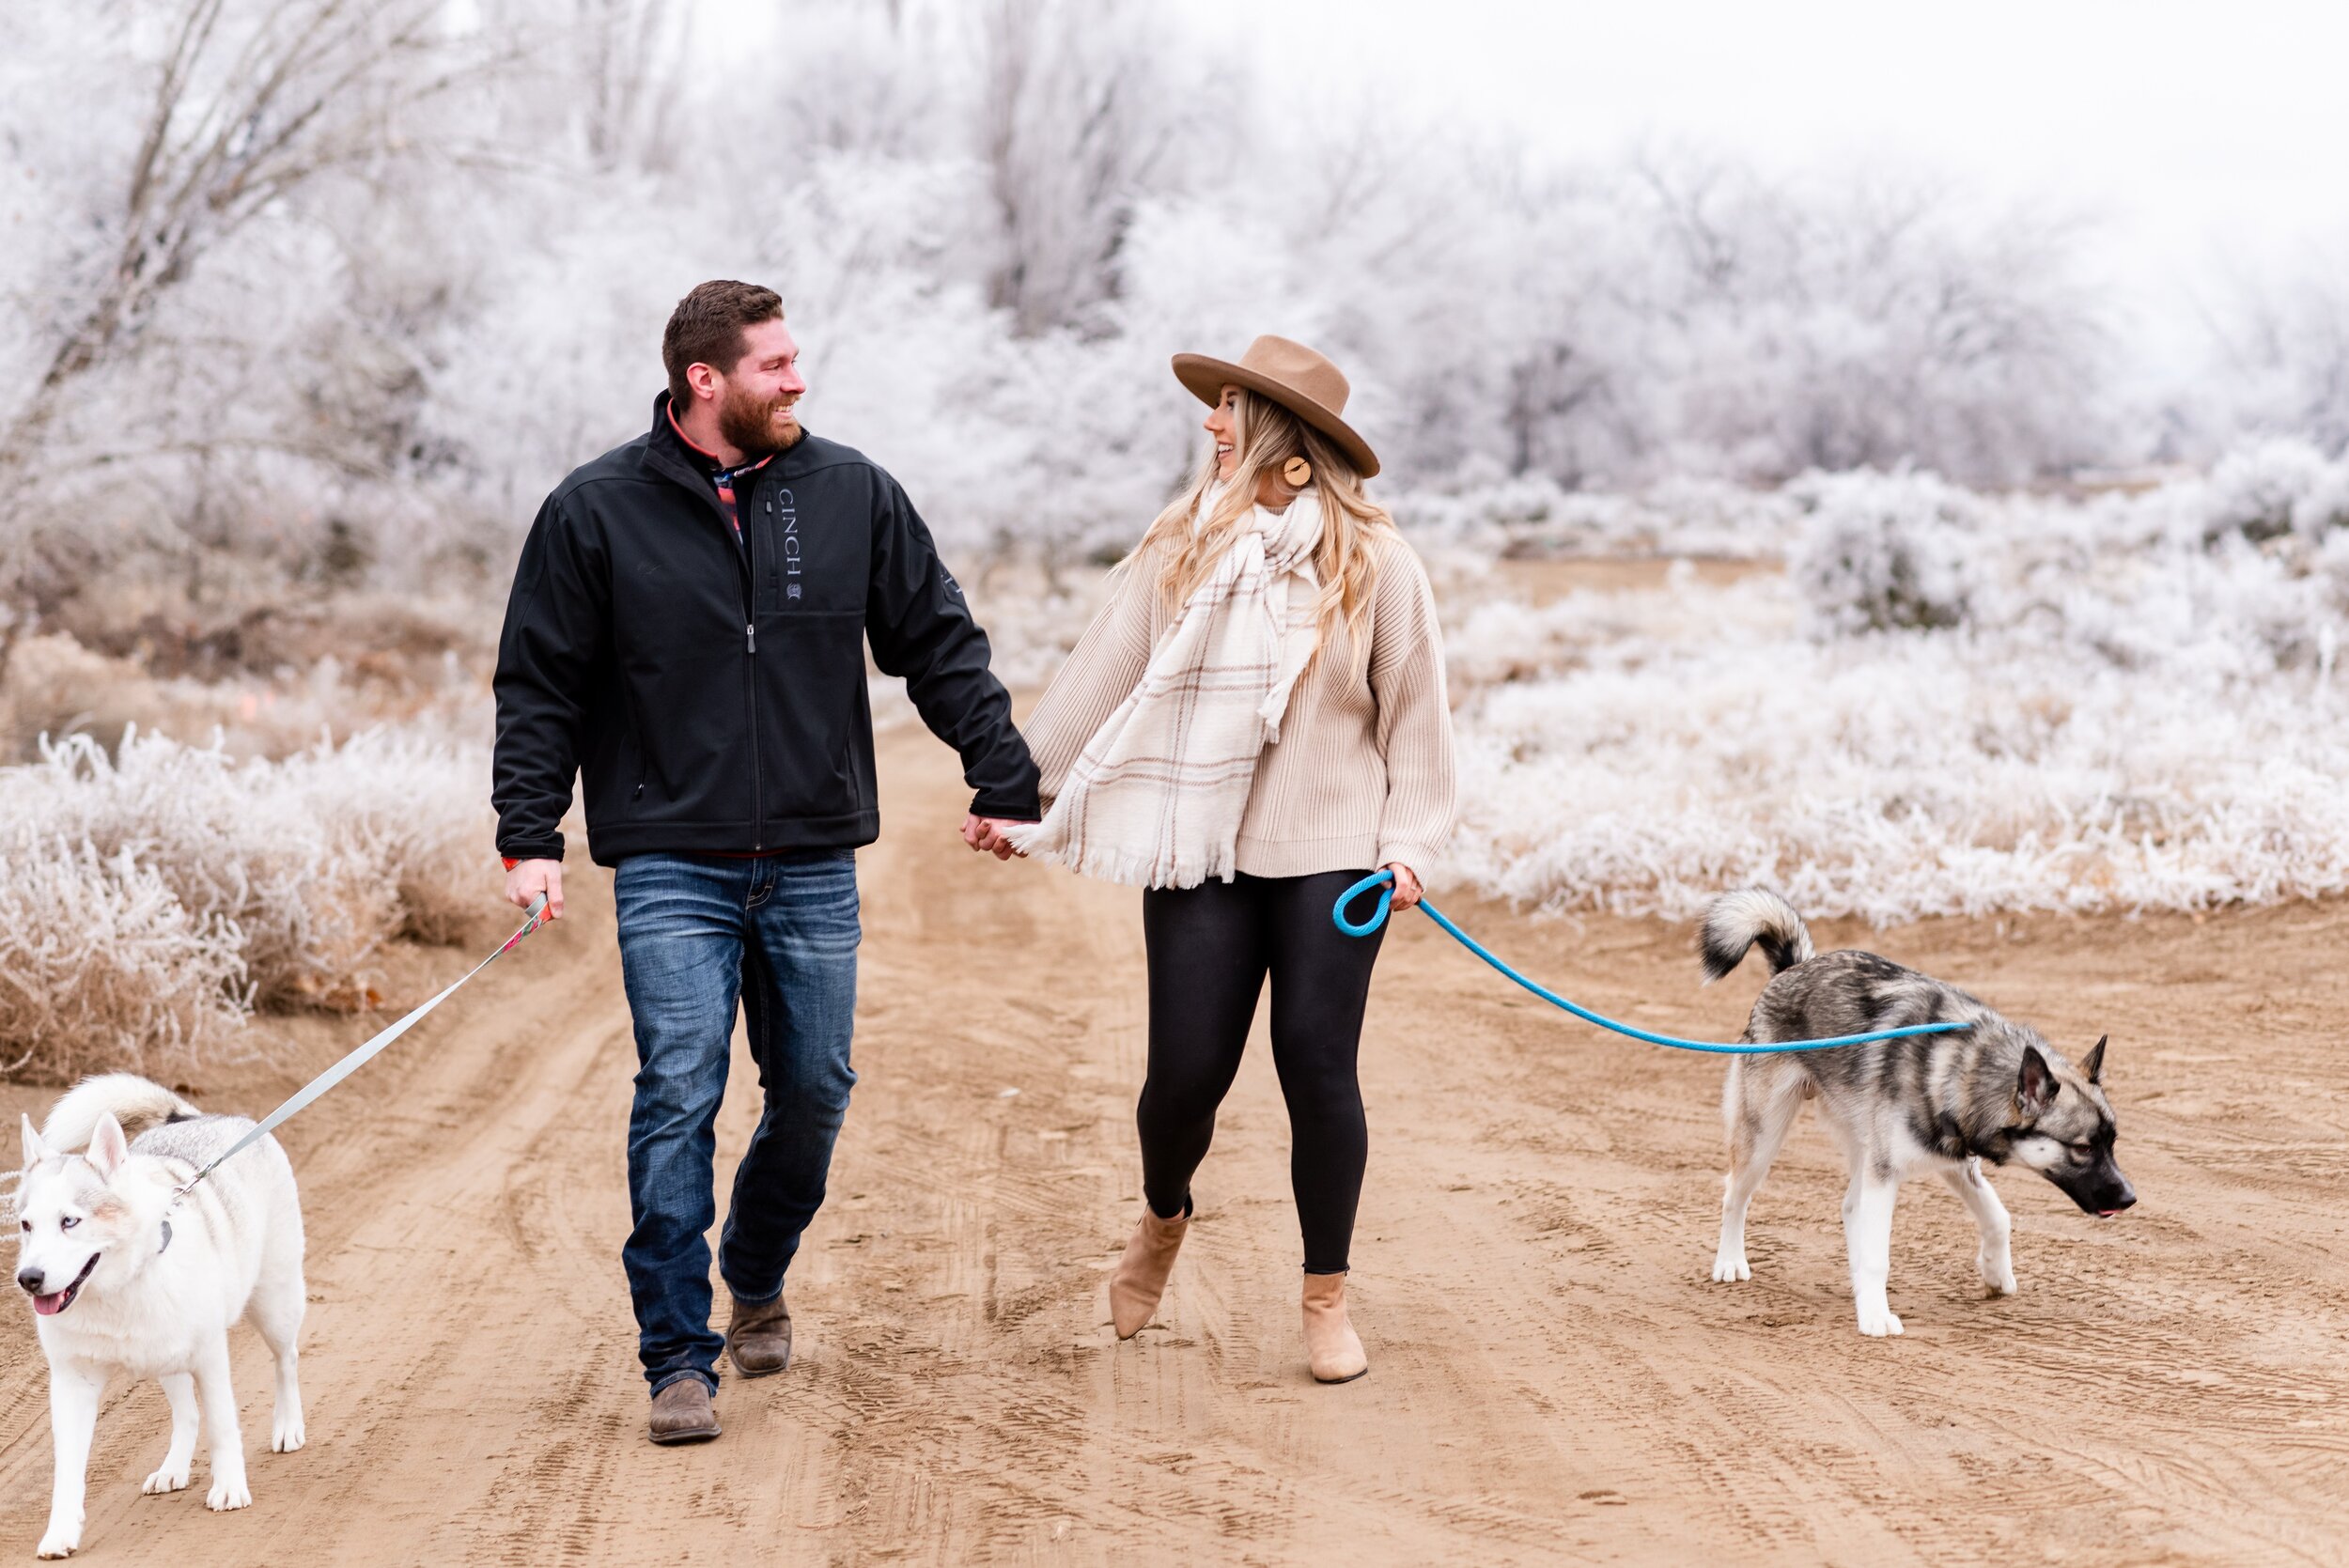 Tri Cities Engagement Couple Photographer - Tri Cities Wedding Photographer - What to Wear for Winter Engagement Photos with Dogs - Winter Engagement Session Outfits - Morgan Tayler Photo &amp; Design